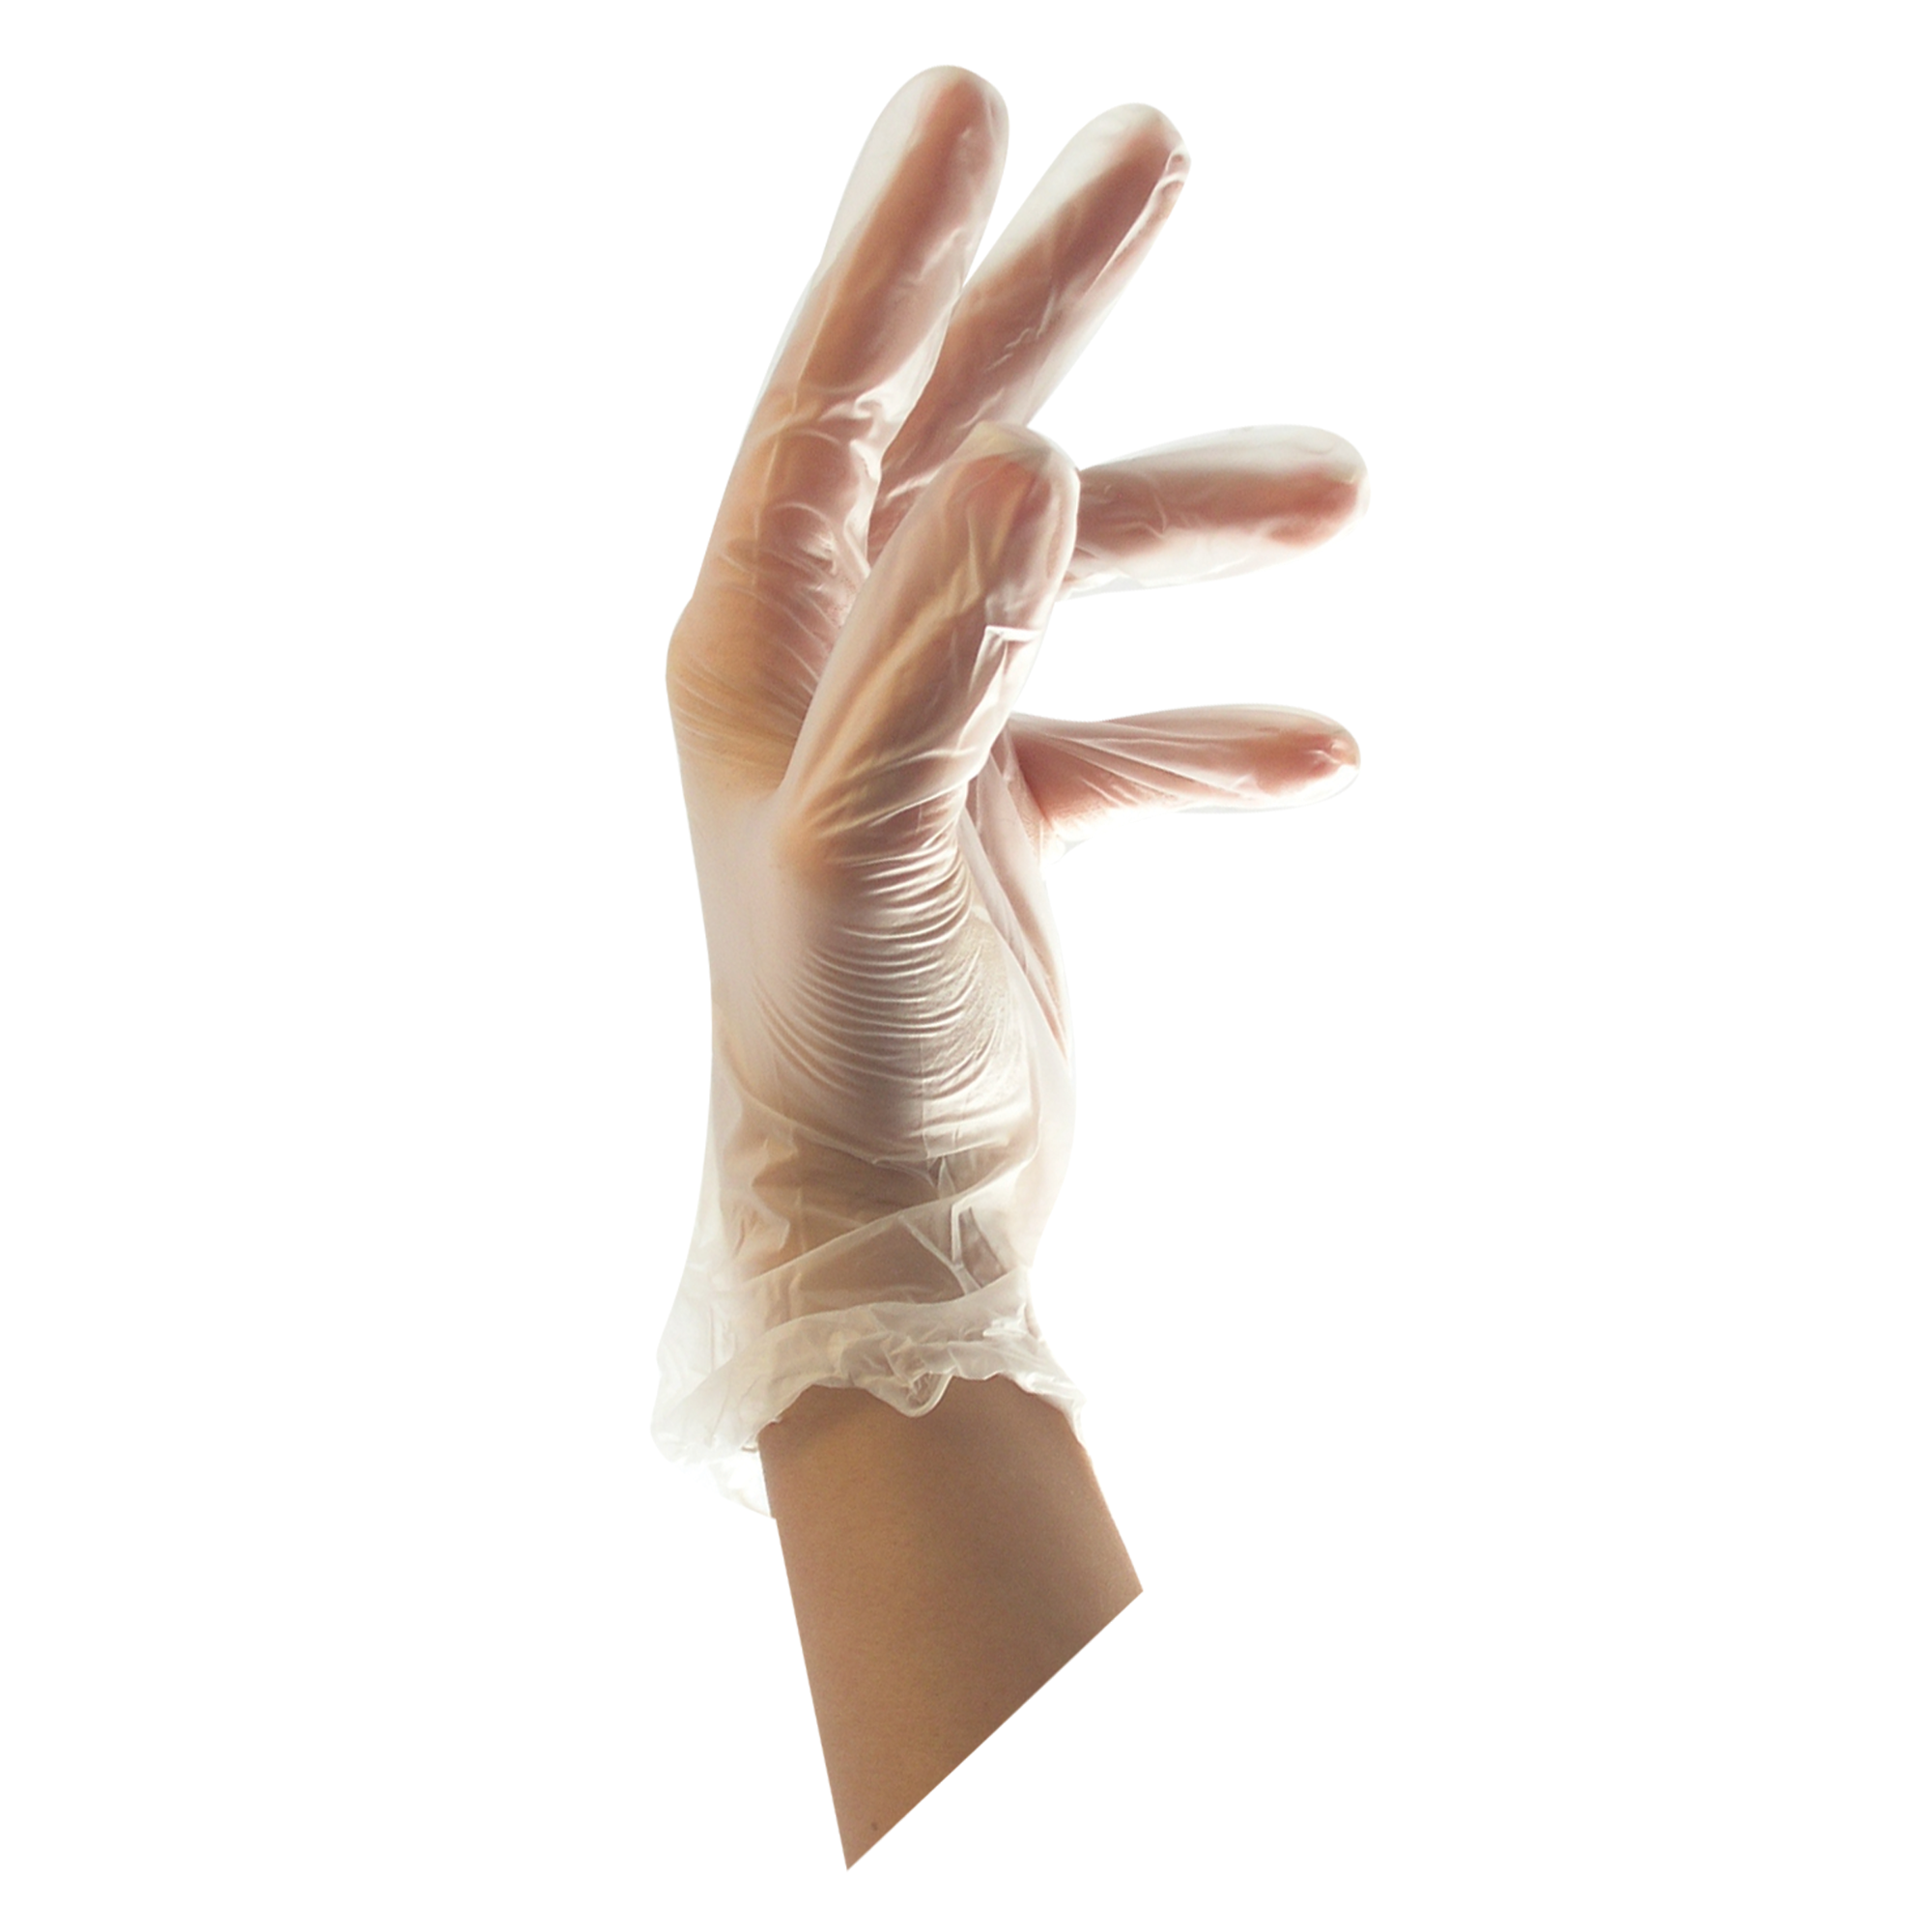 Disposable Vinyl Gloves - Small - 100 ct.